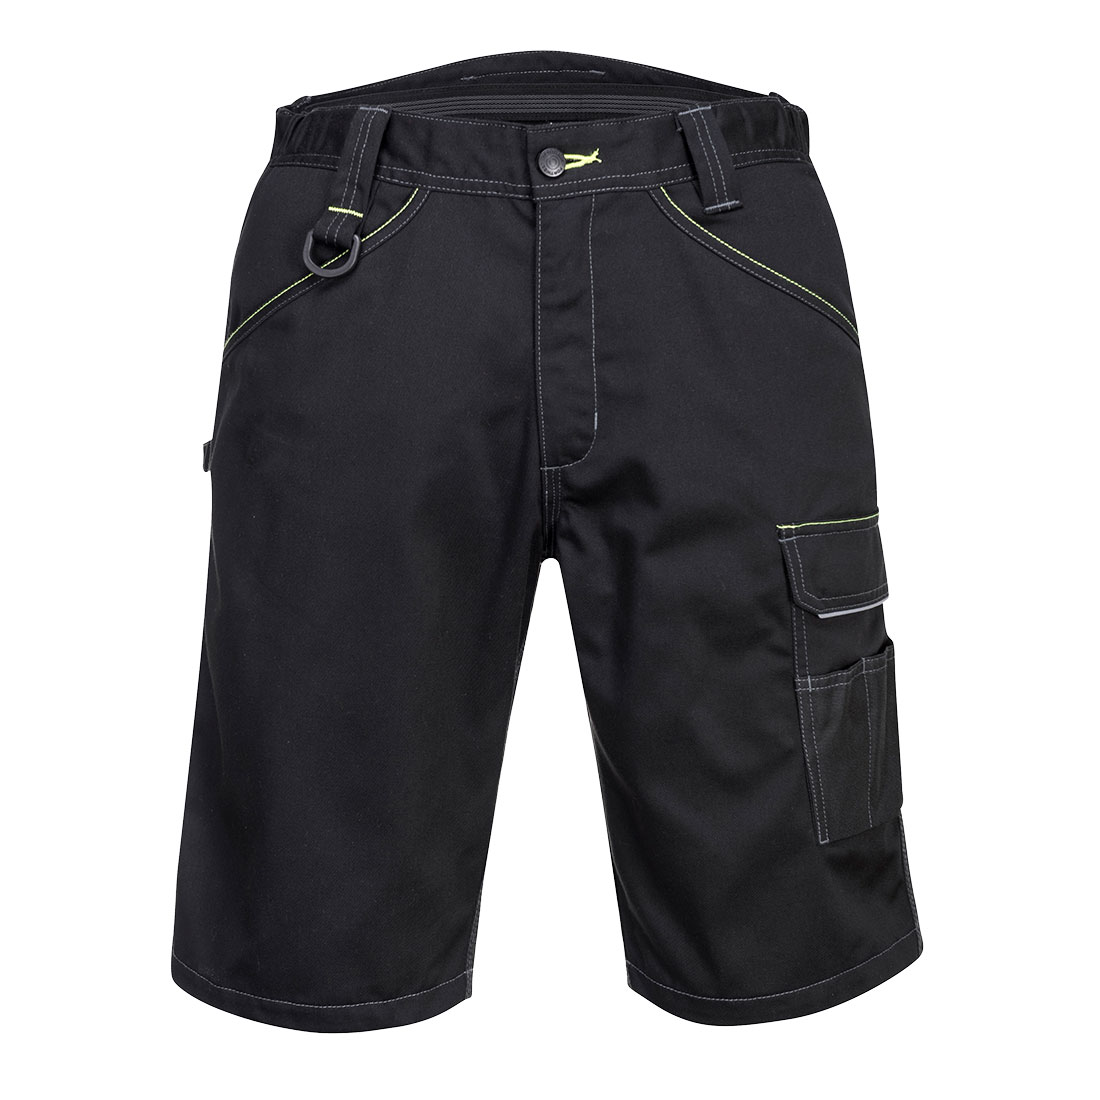 PW3 Work Shorts, Black      Size 42 R/Fit